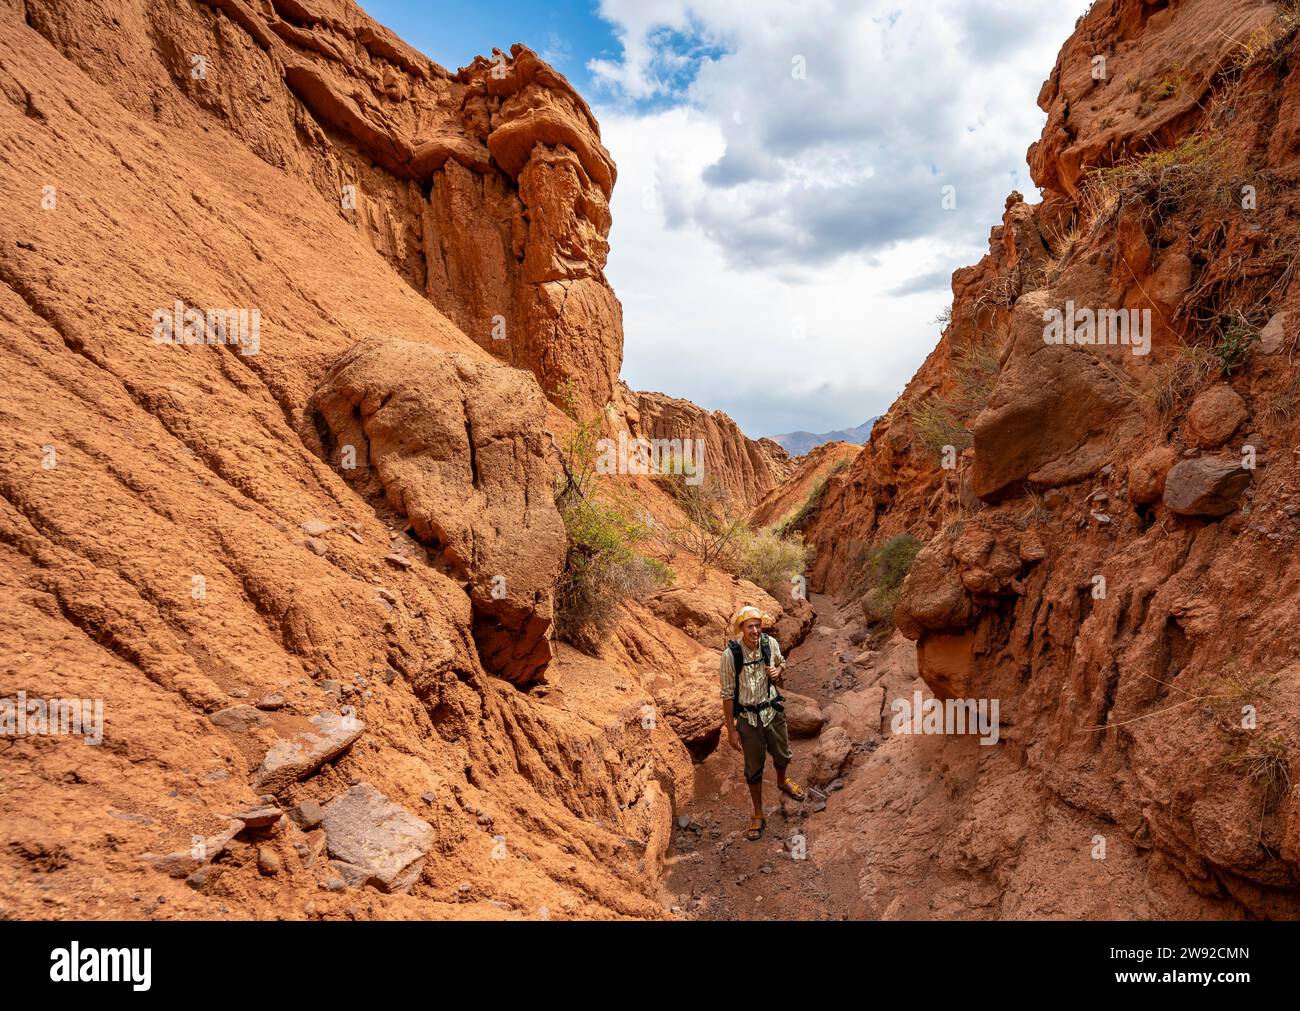 Mountaineer in a canyon with a dry stream bed, eroded mountain landscape with sandstone rocks, canyon with red and orange rock formations, Konorchek Stock Photo